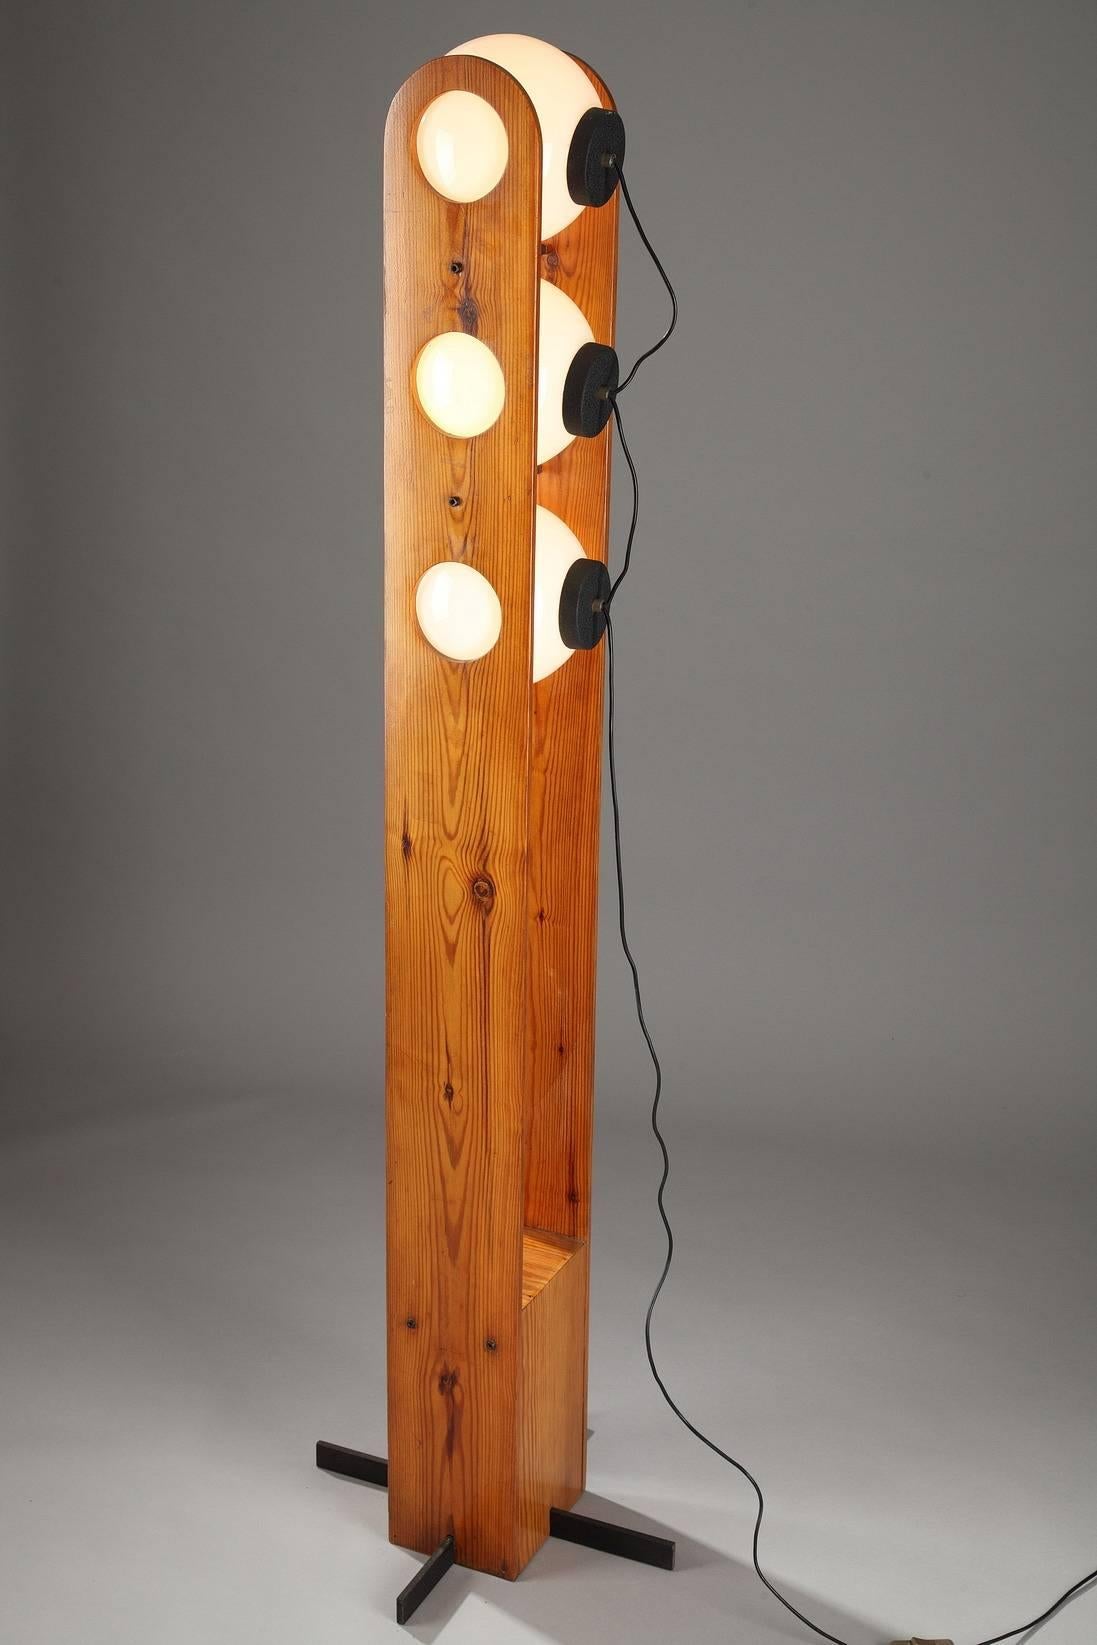 Lacquered Chalet Floor Lamp in the Style of Charlotte Perriand for Les Arcs